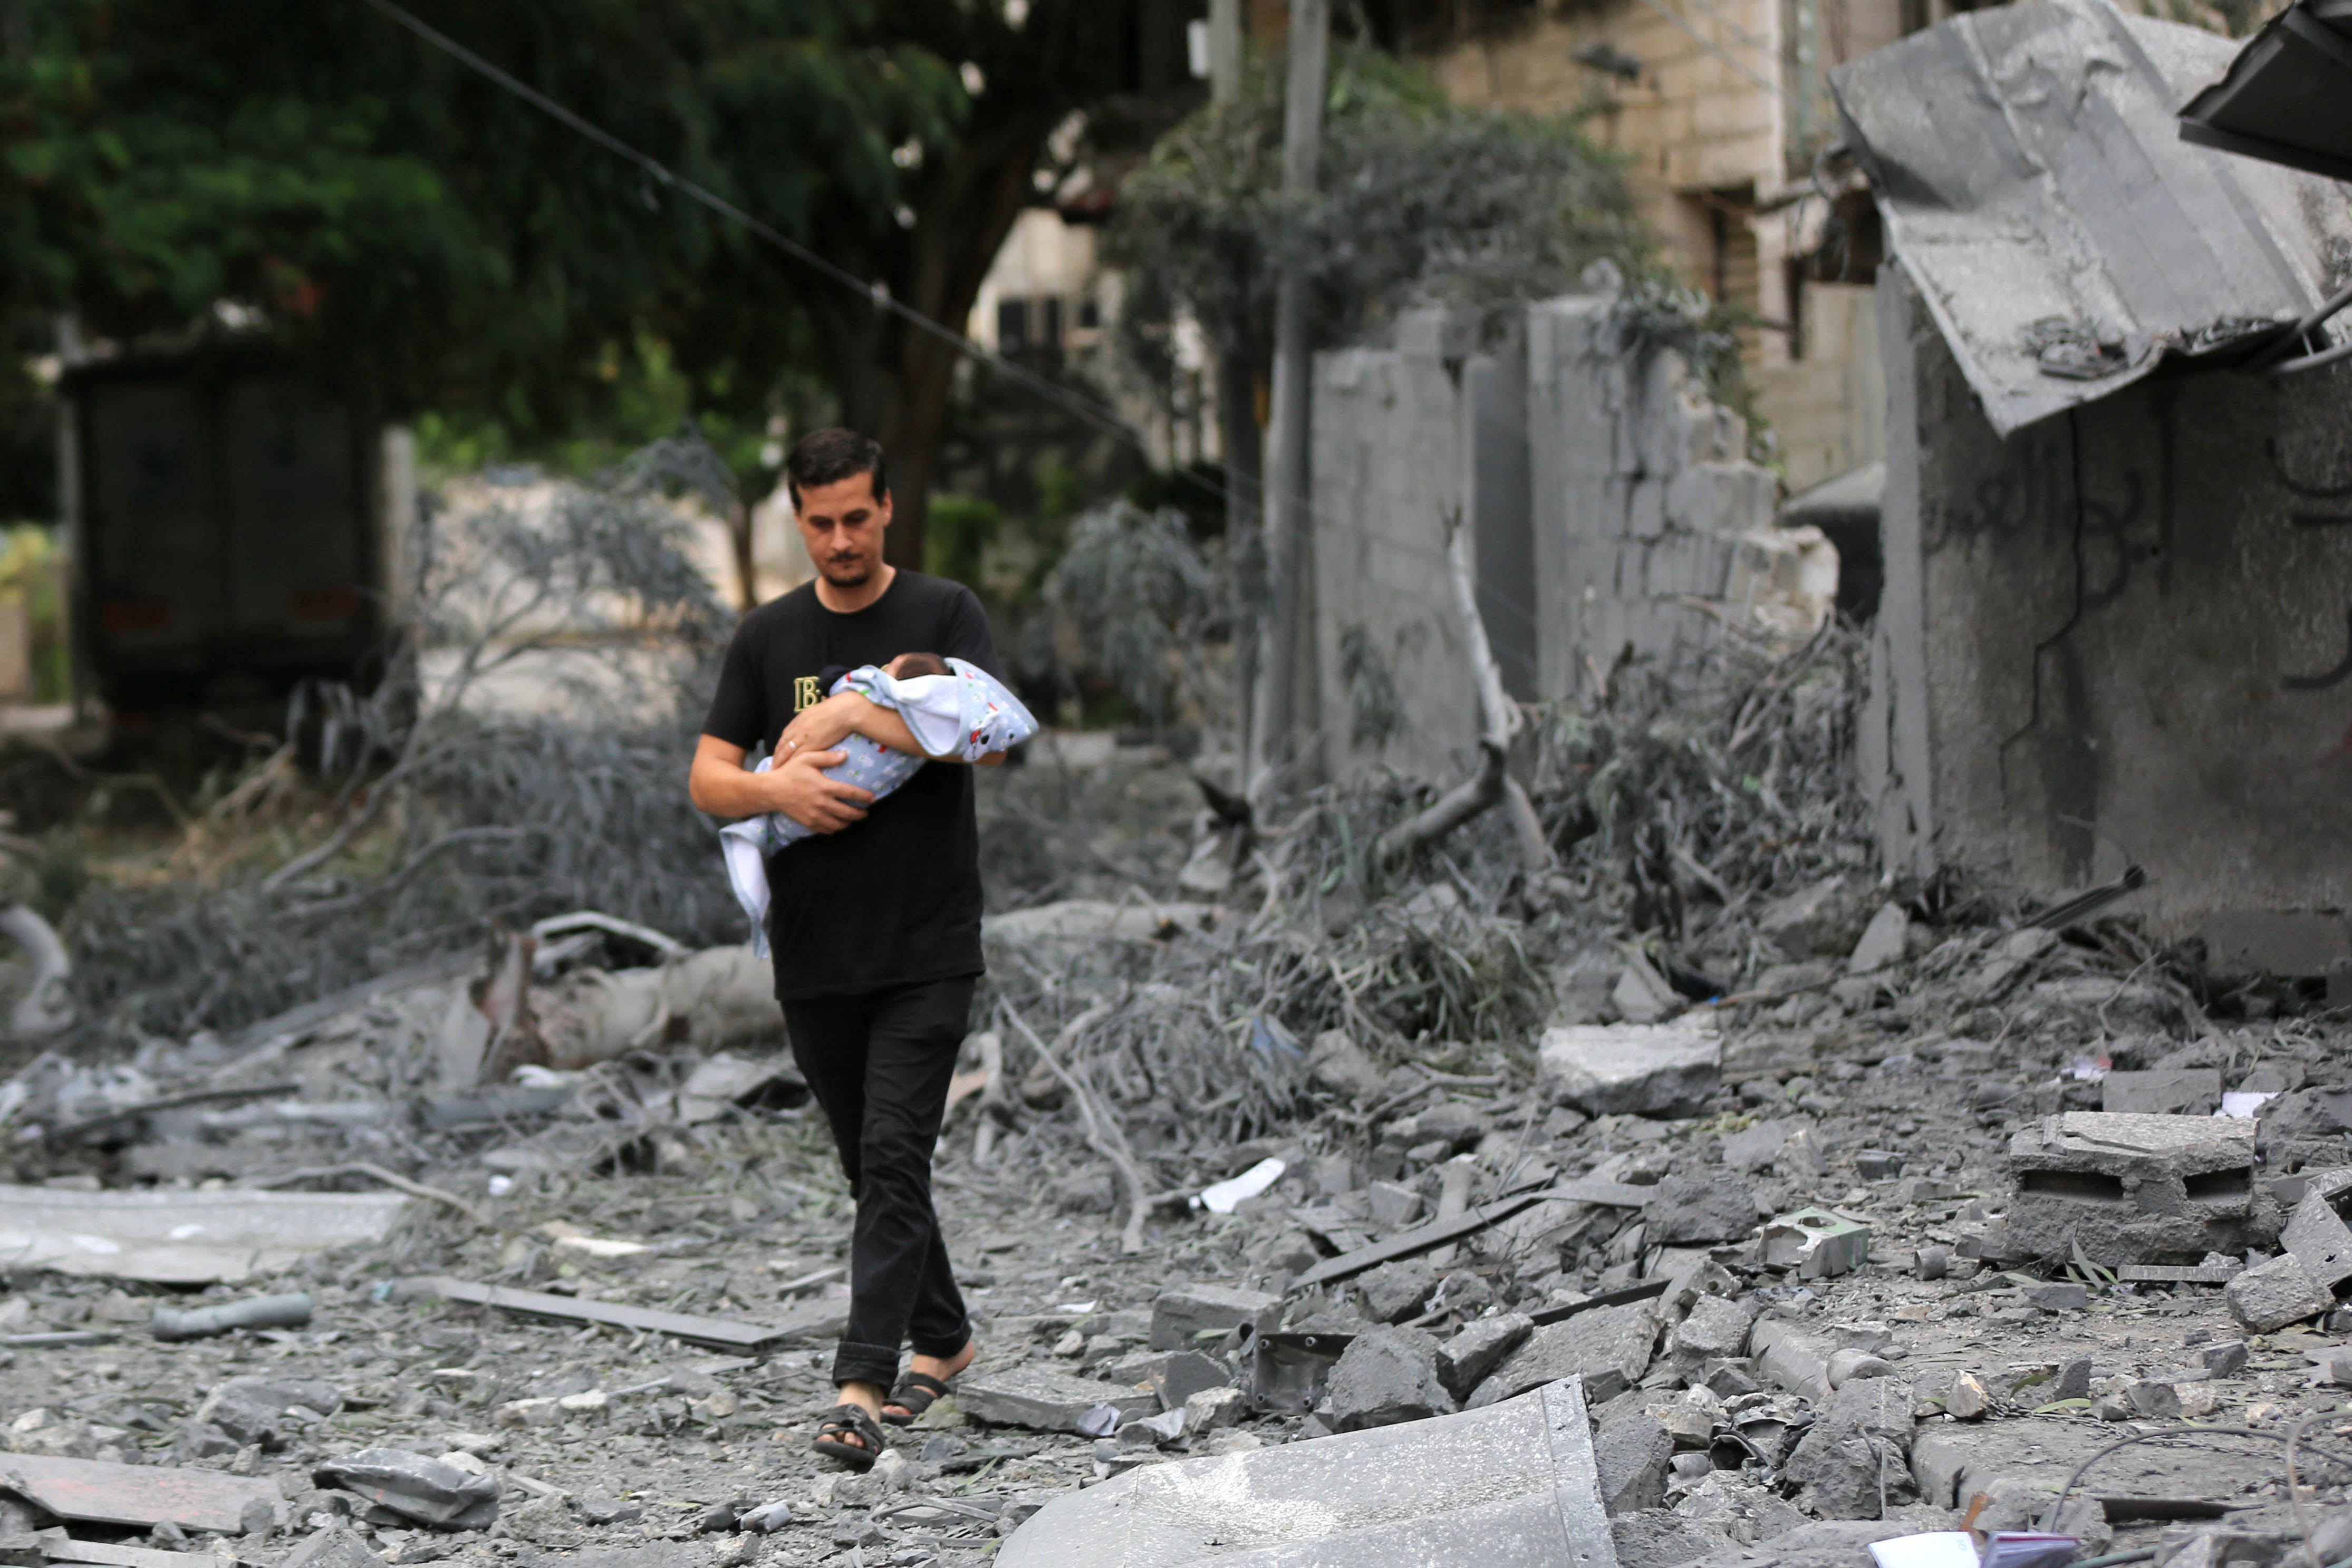 A man carrying an infant through the rumble of destruction in Gaza.